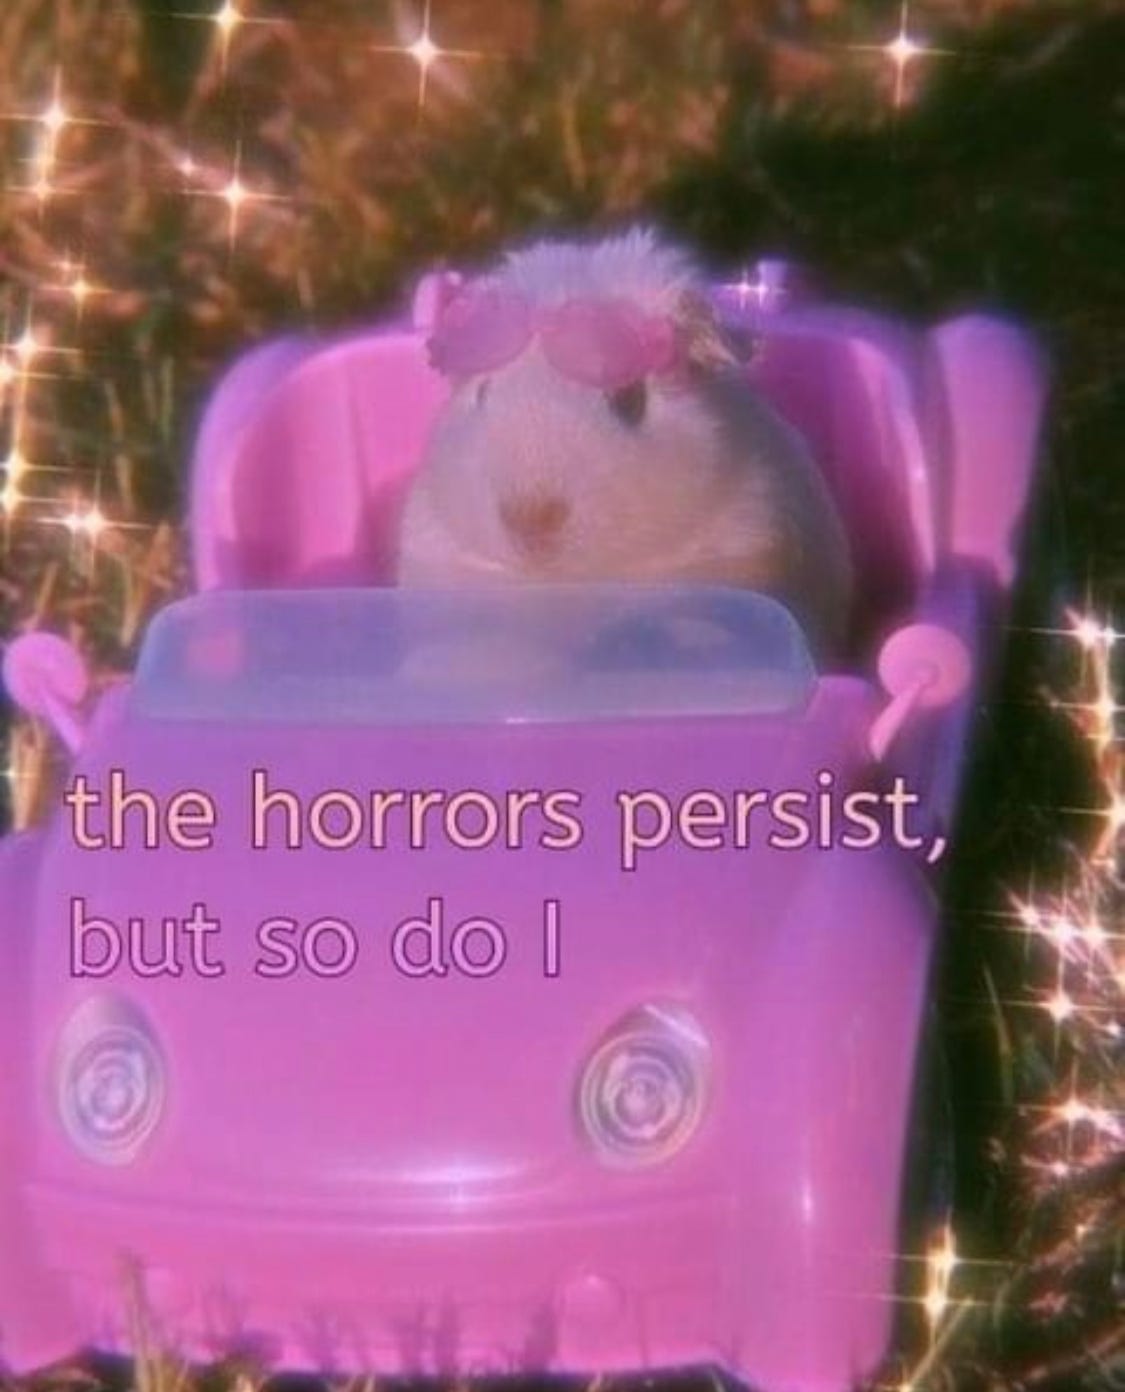 A meme featuring a guinea pig wearing pink sunglasses in a pink car, surrounded by sparkly lights. Text on the image reads "The horrors persist, but so do I."